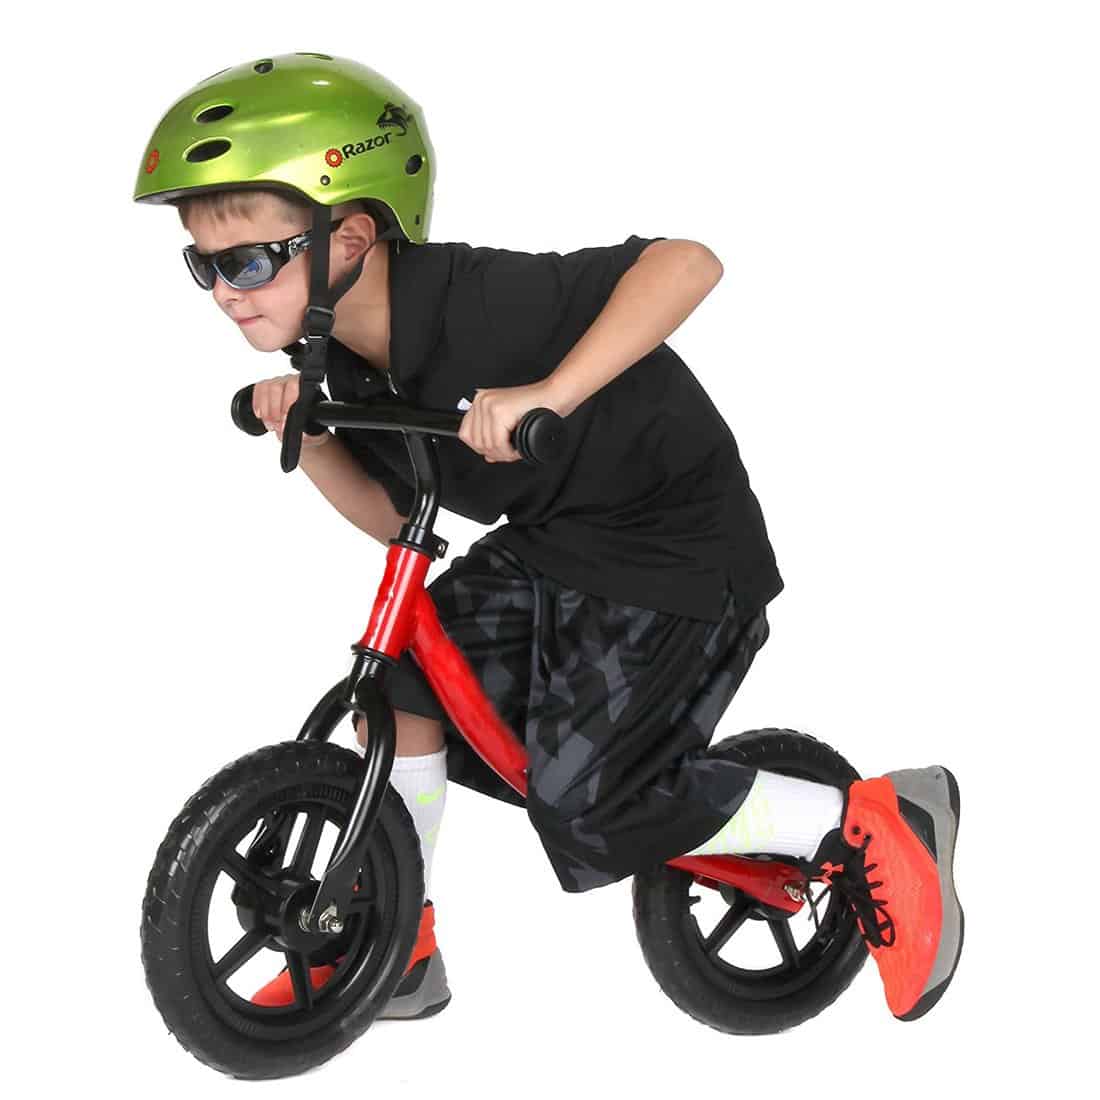 Best Self Balancing Bicycle with No Pedals, 18 Months (Black)